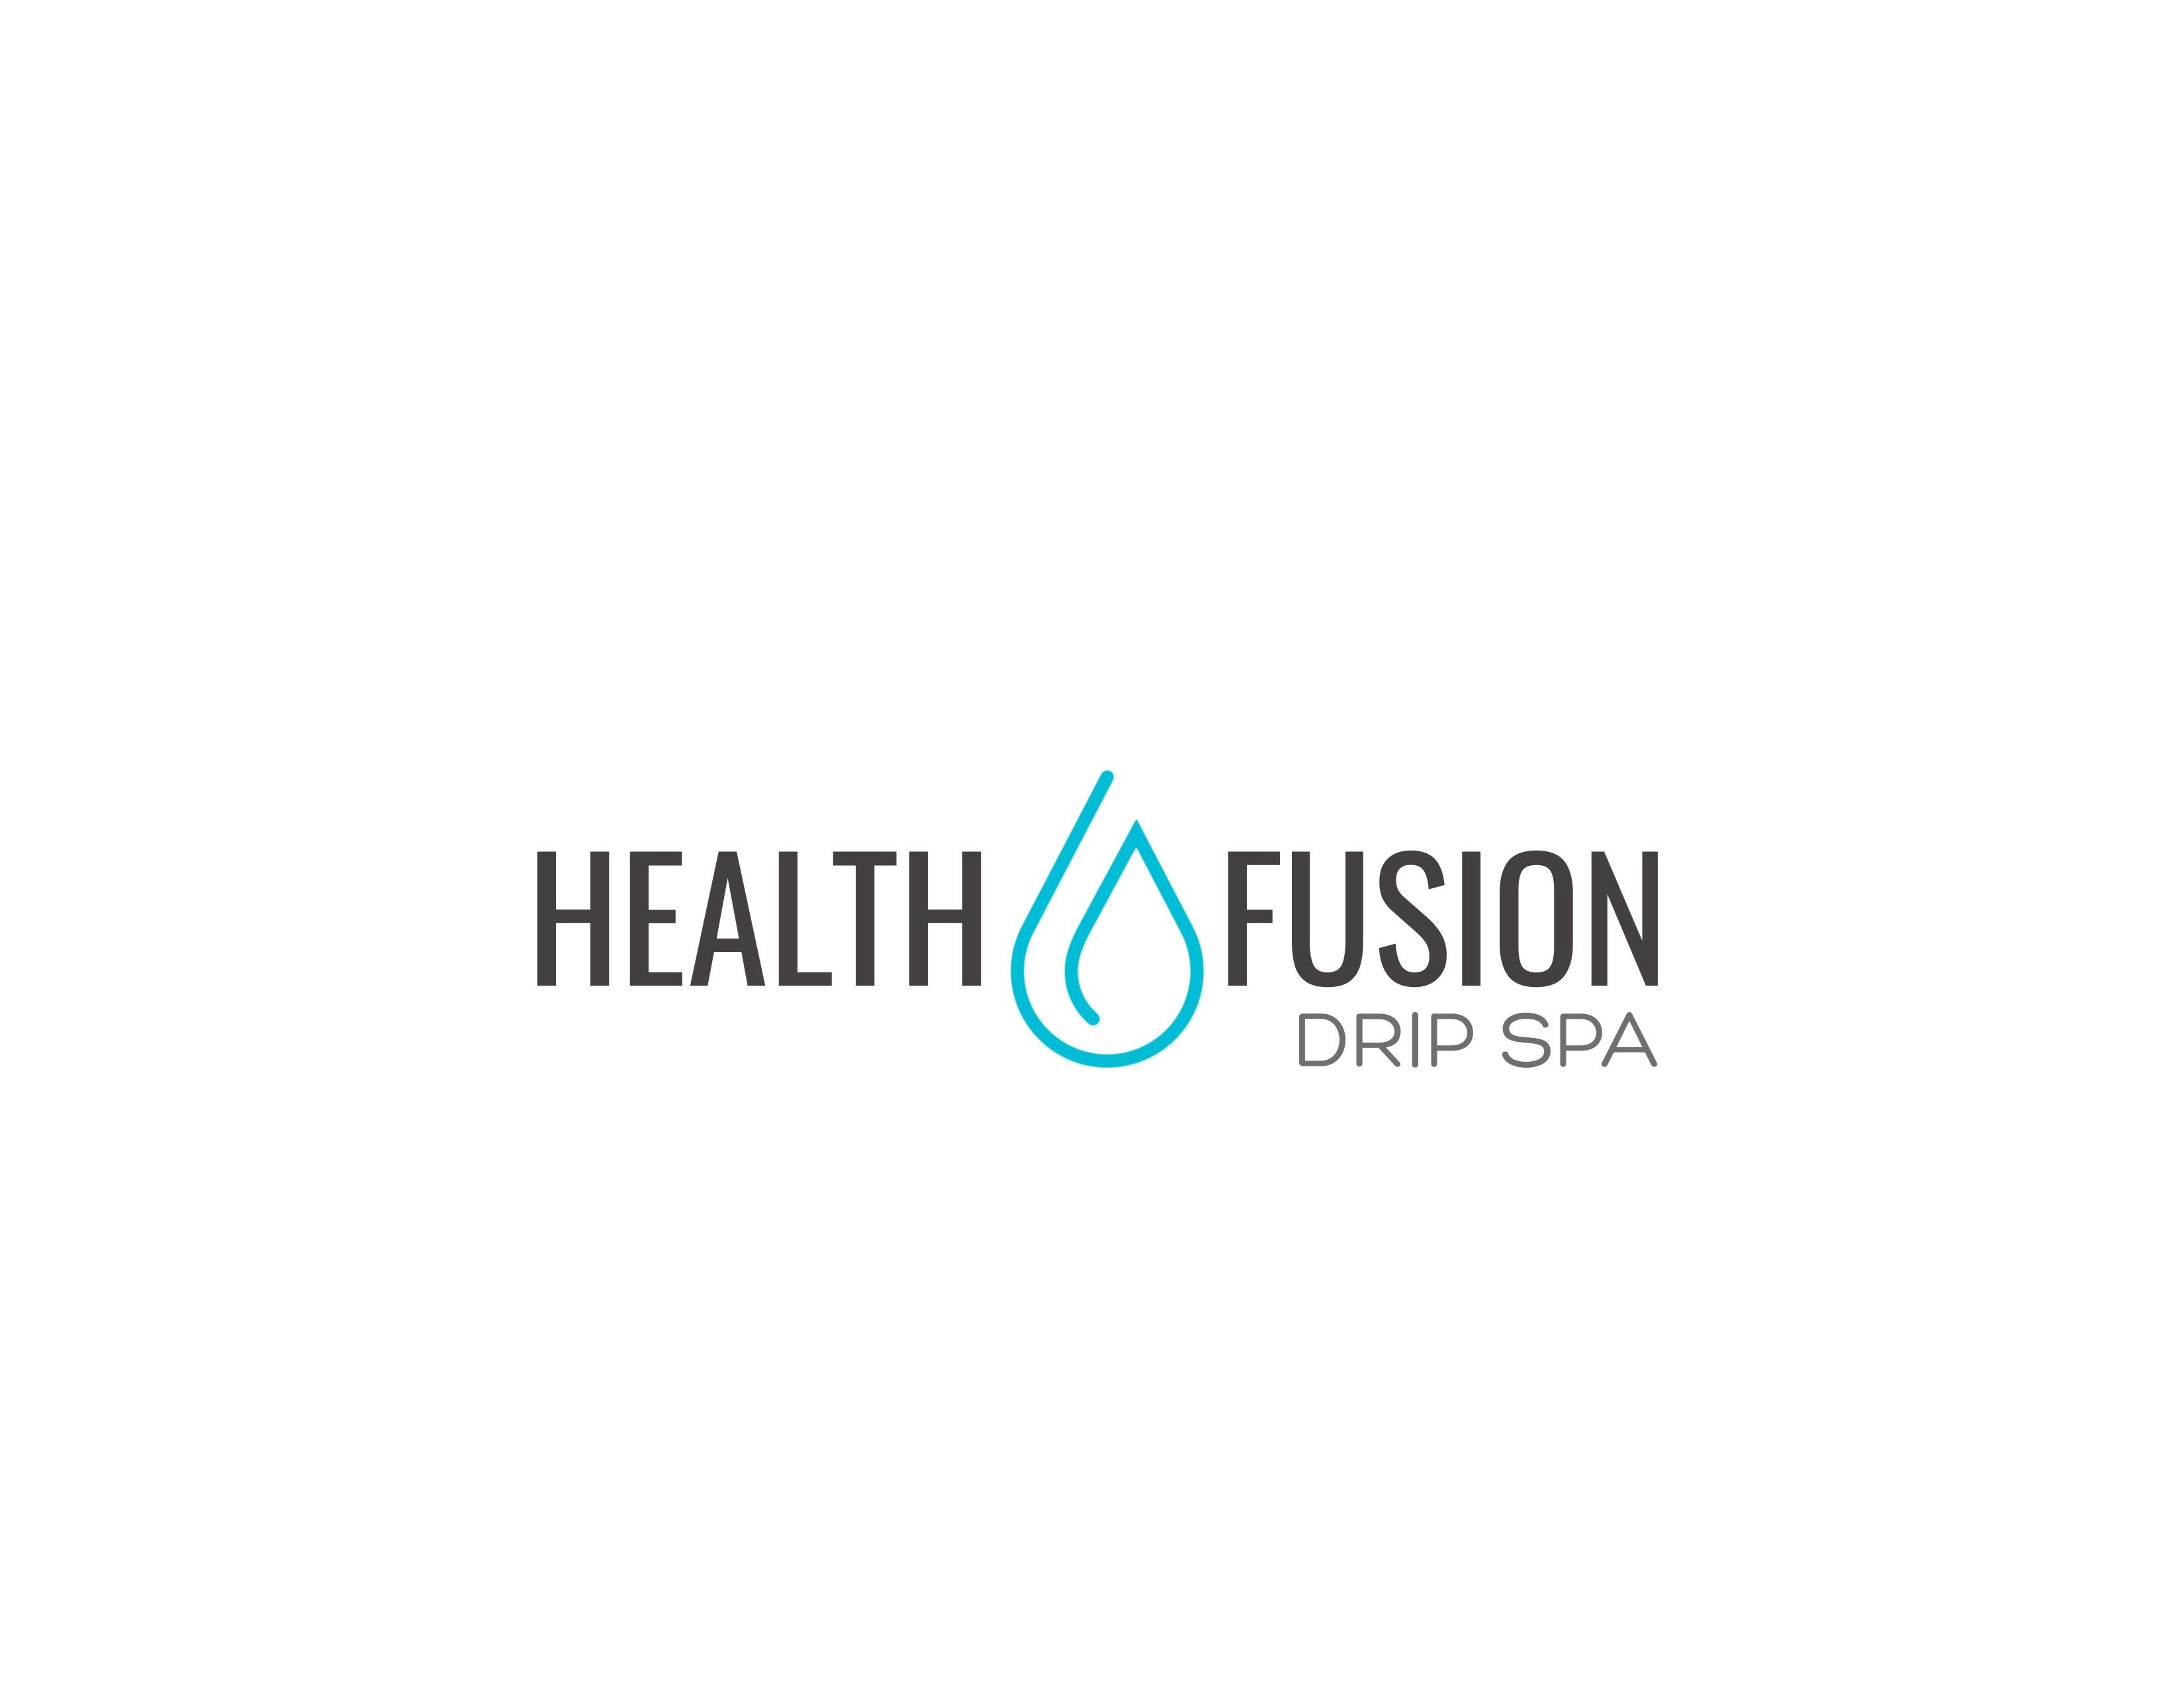 WE ARE AN EXCITING NEW BOUTIQUE MED SPA IN THE AREA. WE OFFER A RANGE OF IV HYDRATION AND VITAMIN THERAPIES DESIGNED TO BOOST YOUR ENERGY, DETOXIFY & MORE!!!!!